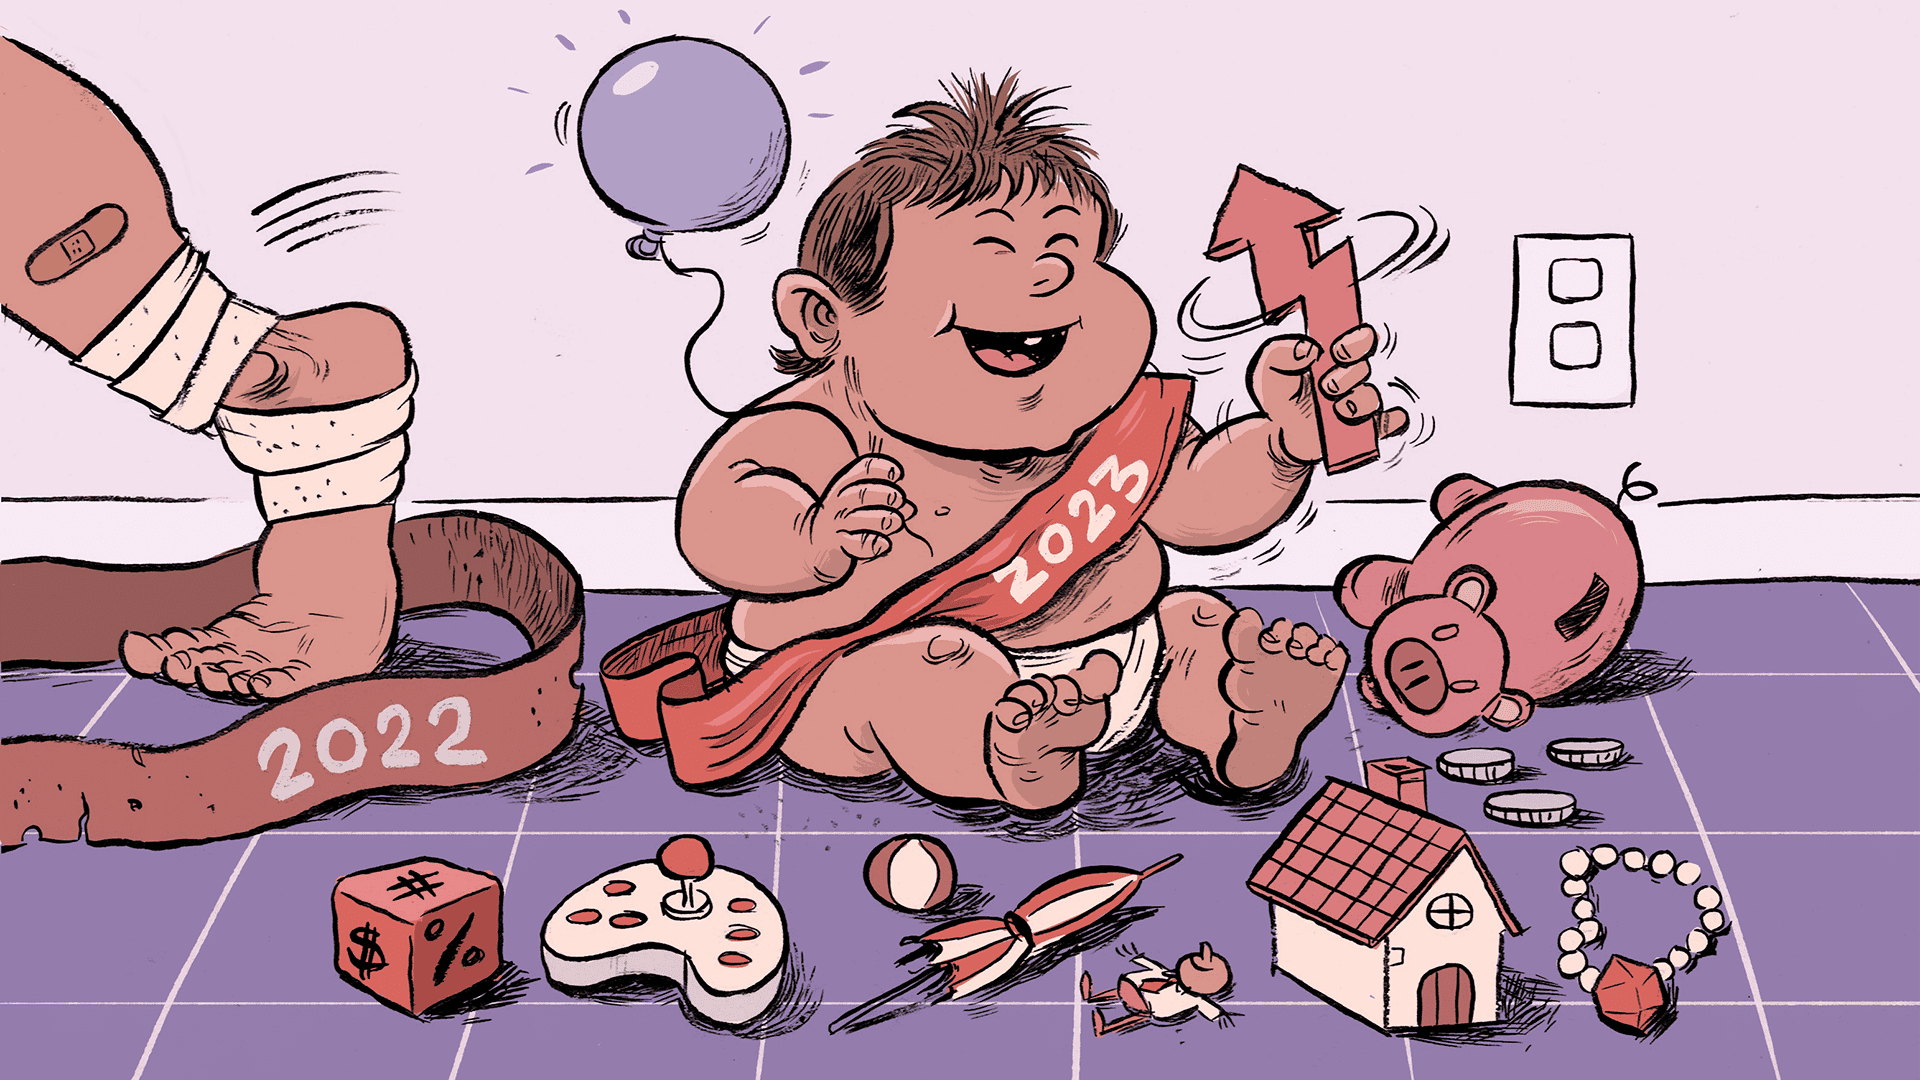 2023 New years baby celebrating with toys around him representing various financial topics, while 2022 adult, tired and injured, walks off the scene